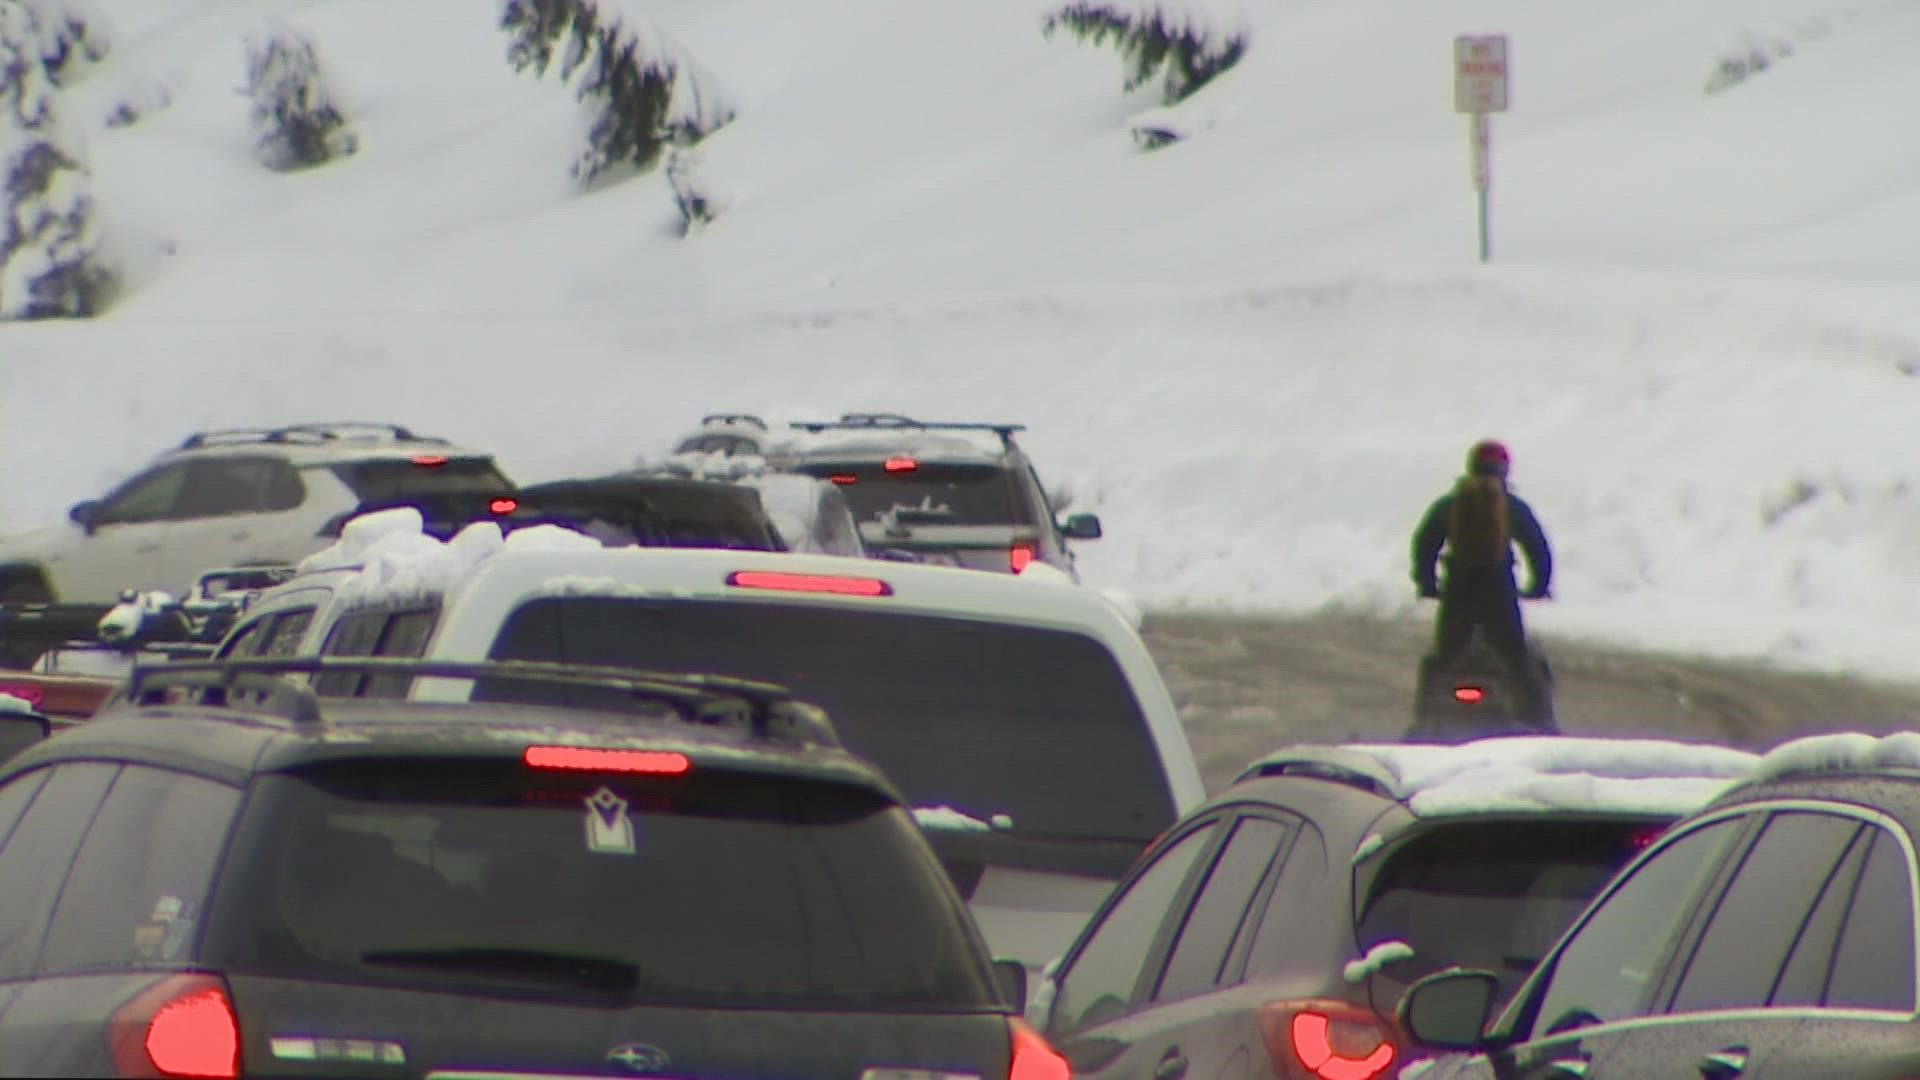 Travelers were backed up for hours Saturday as heavy snowfall led to multiple collisions and a shutdown of both directions of I-90.